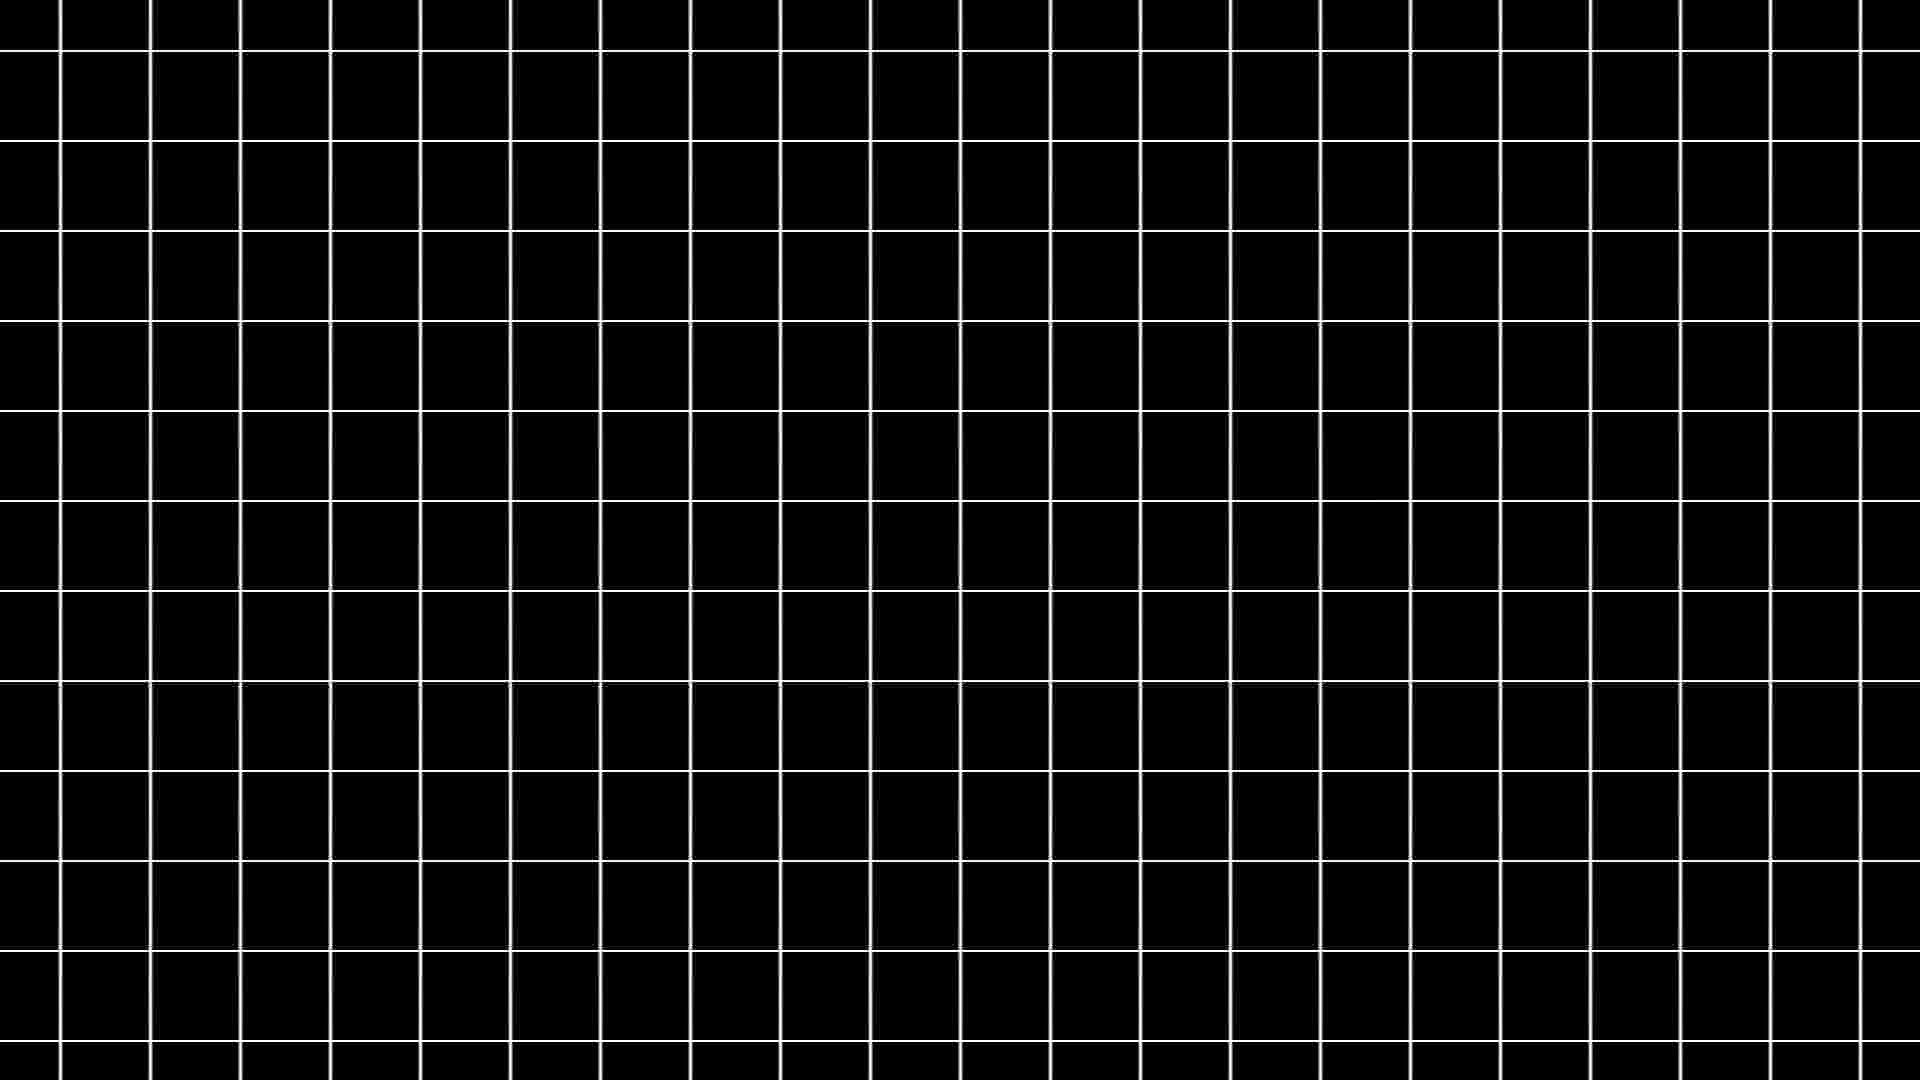 A black and white grid - Grid